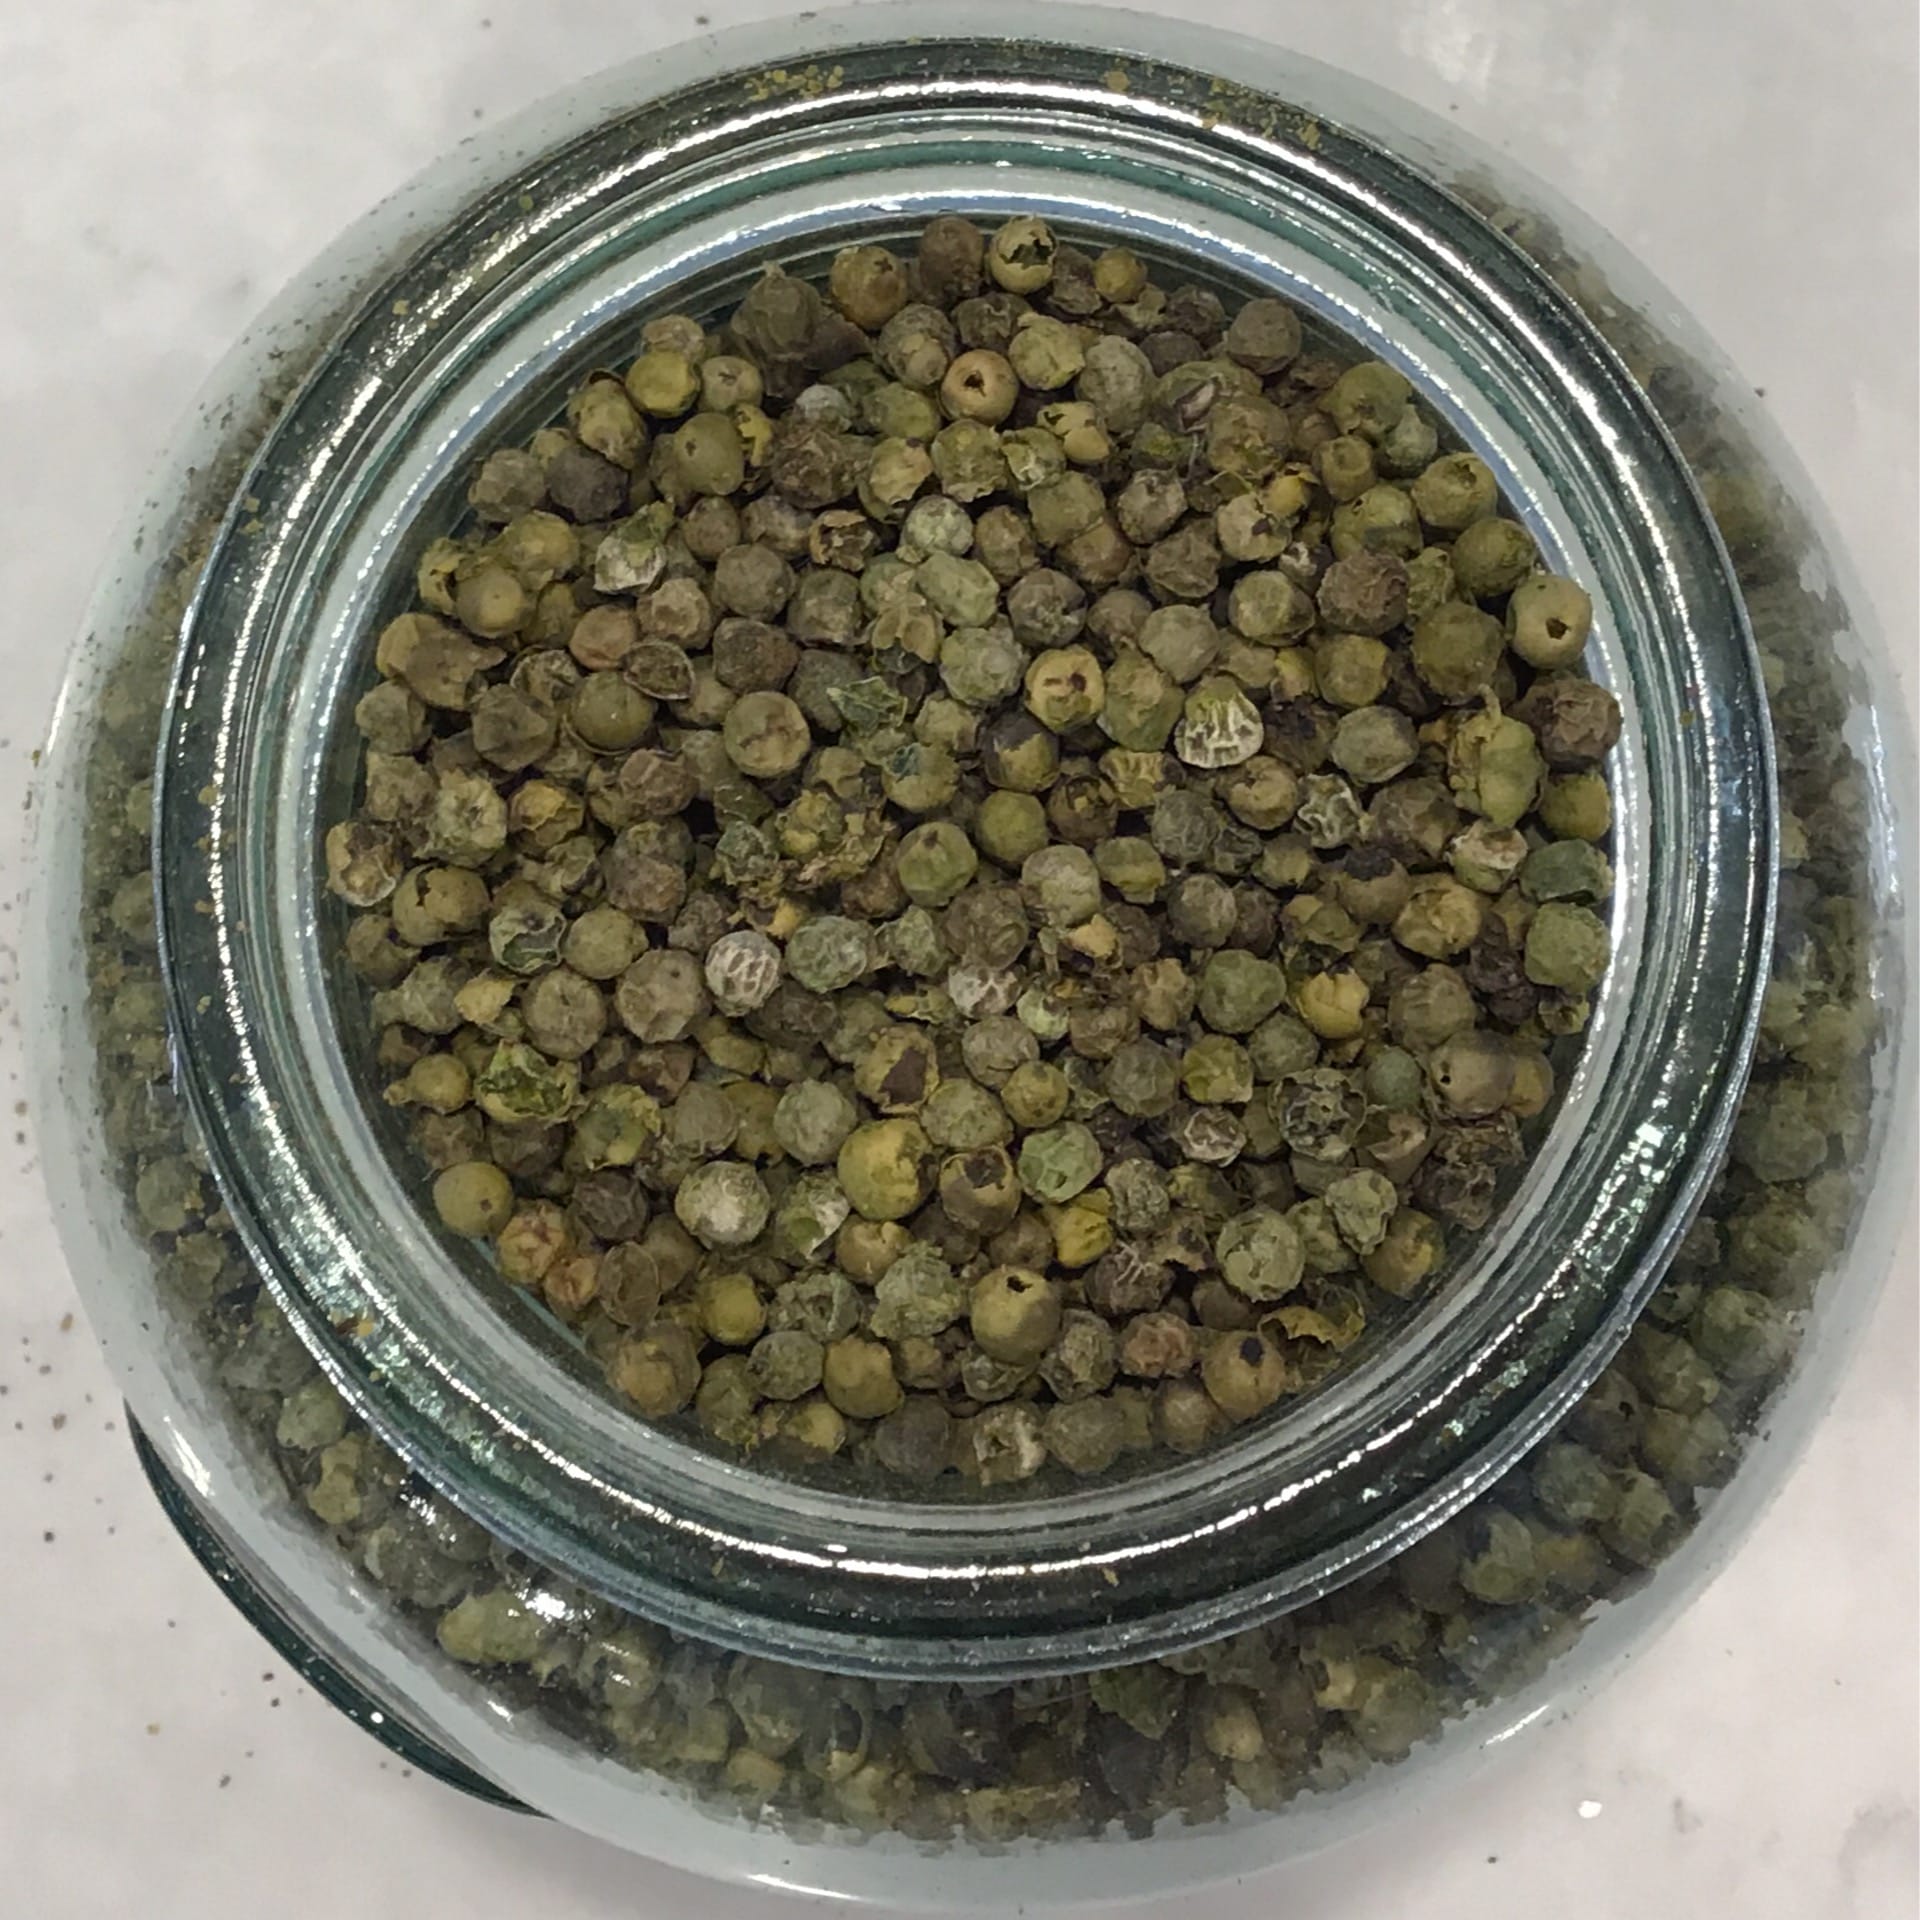 Whole green peppercorns young peppercorns organic create your own blend of peppercorn colors for your refillable grinder